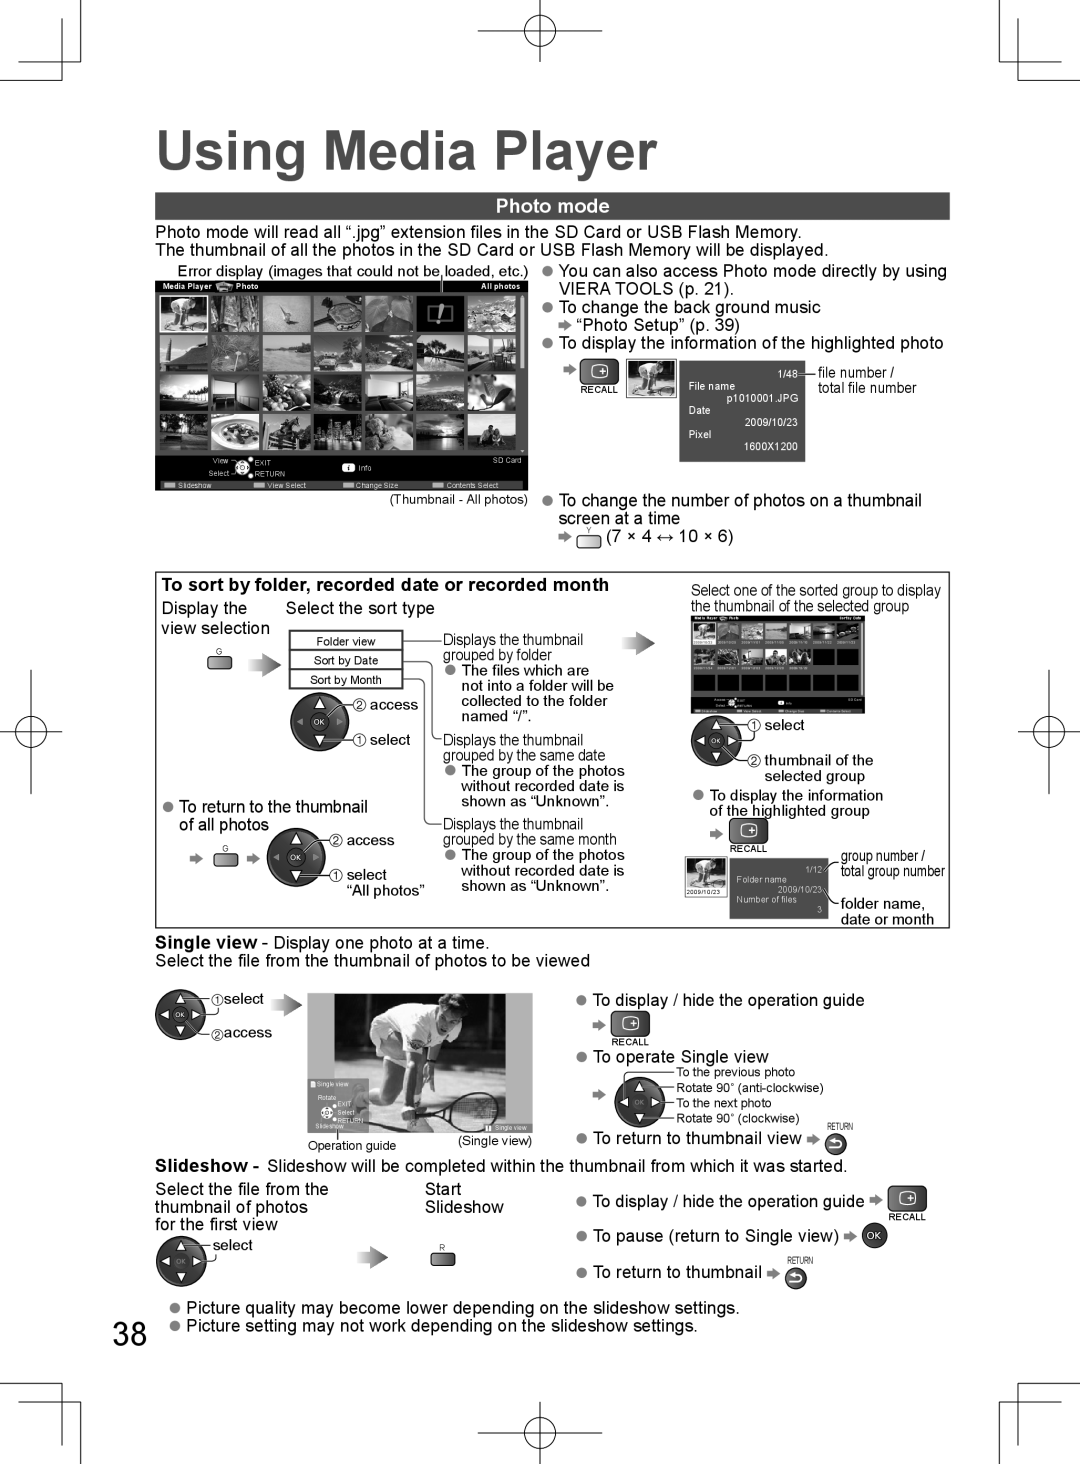 Panasonic TH-L32D25M Photo mode, To sort by folder, recorded date or recorded month, To display / hide the operation guide 